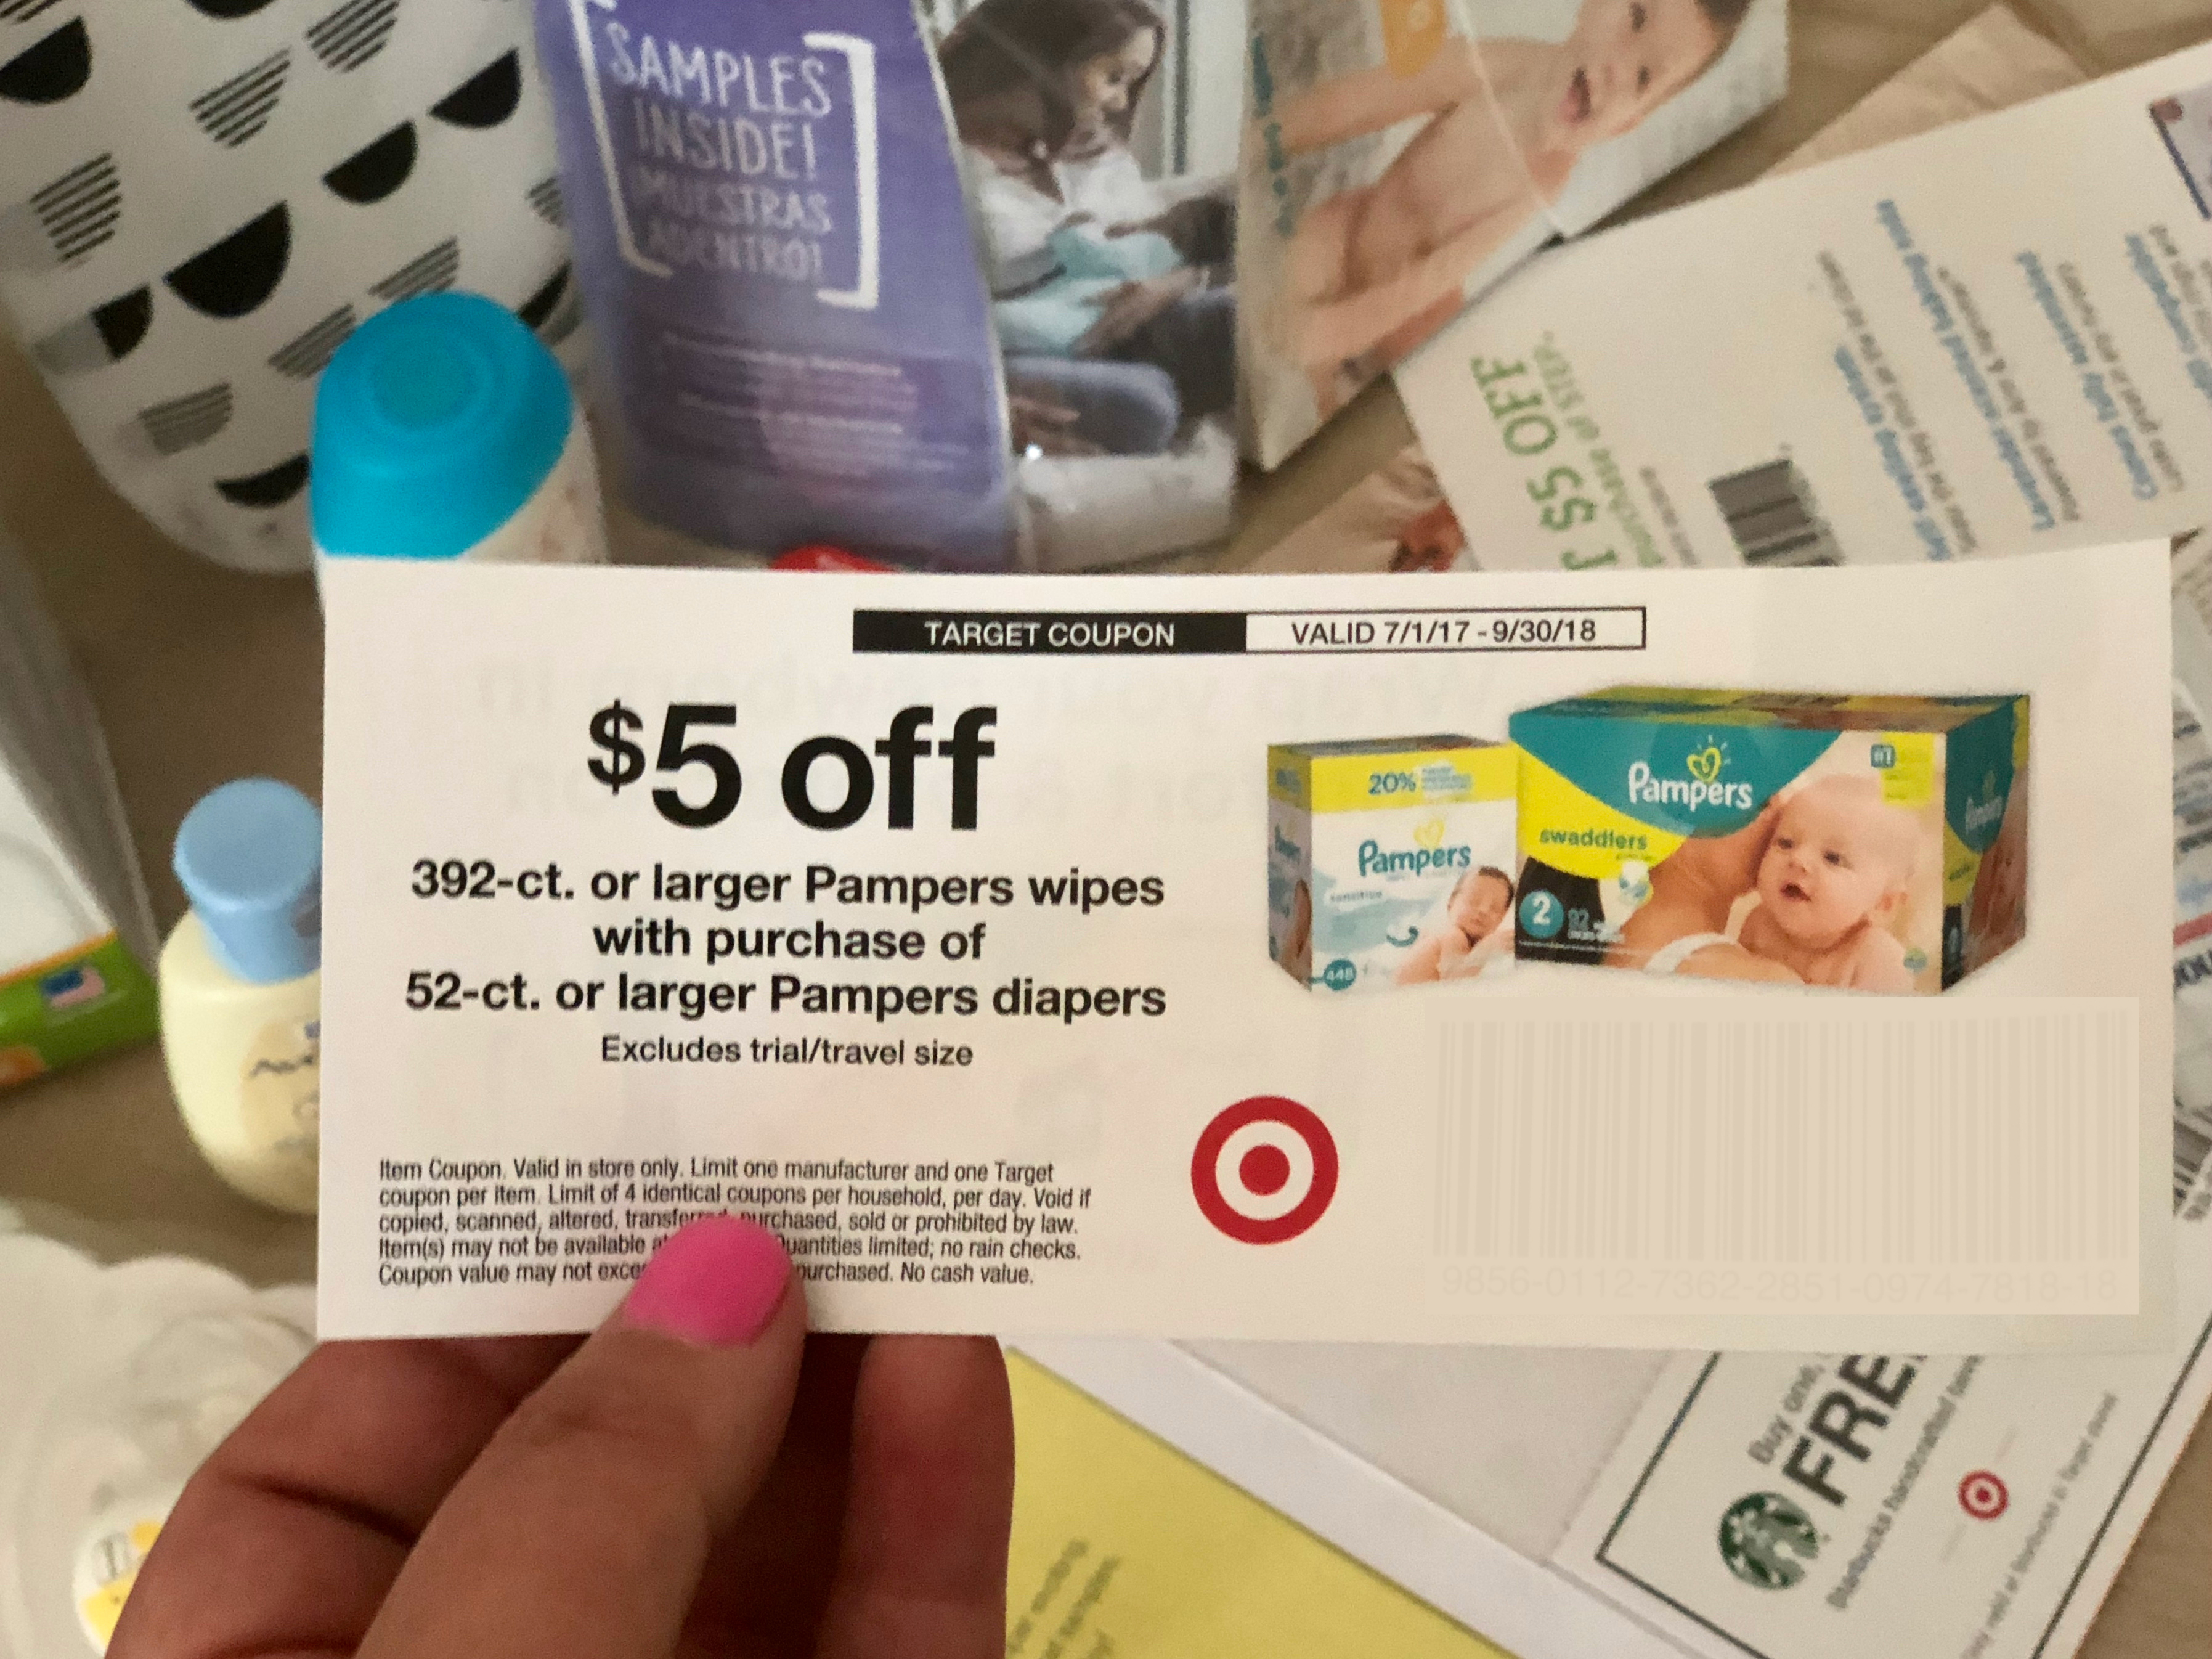 target baby registry bag with free gift coupons and samples - high value diaper coupon